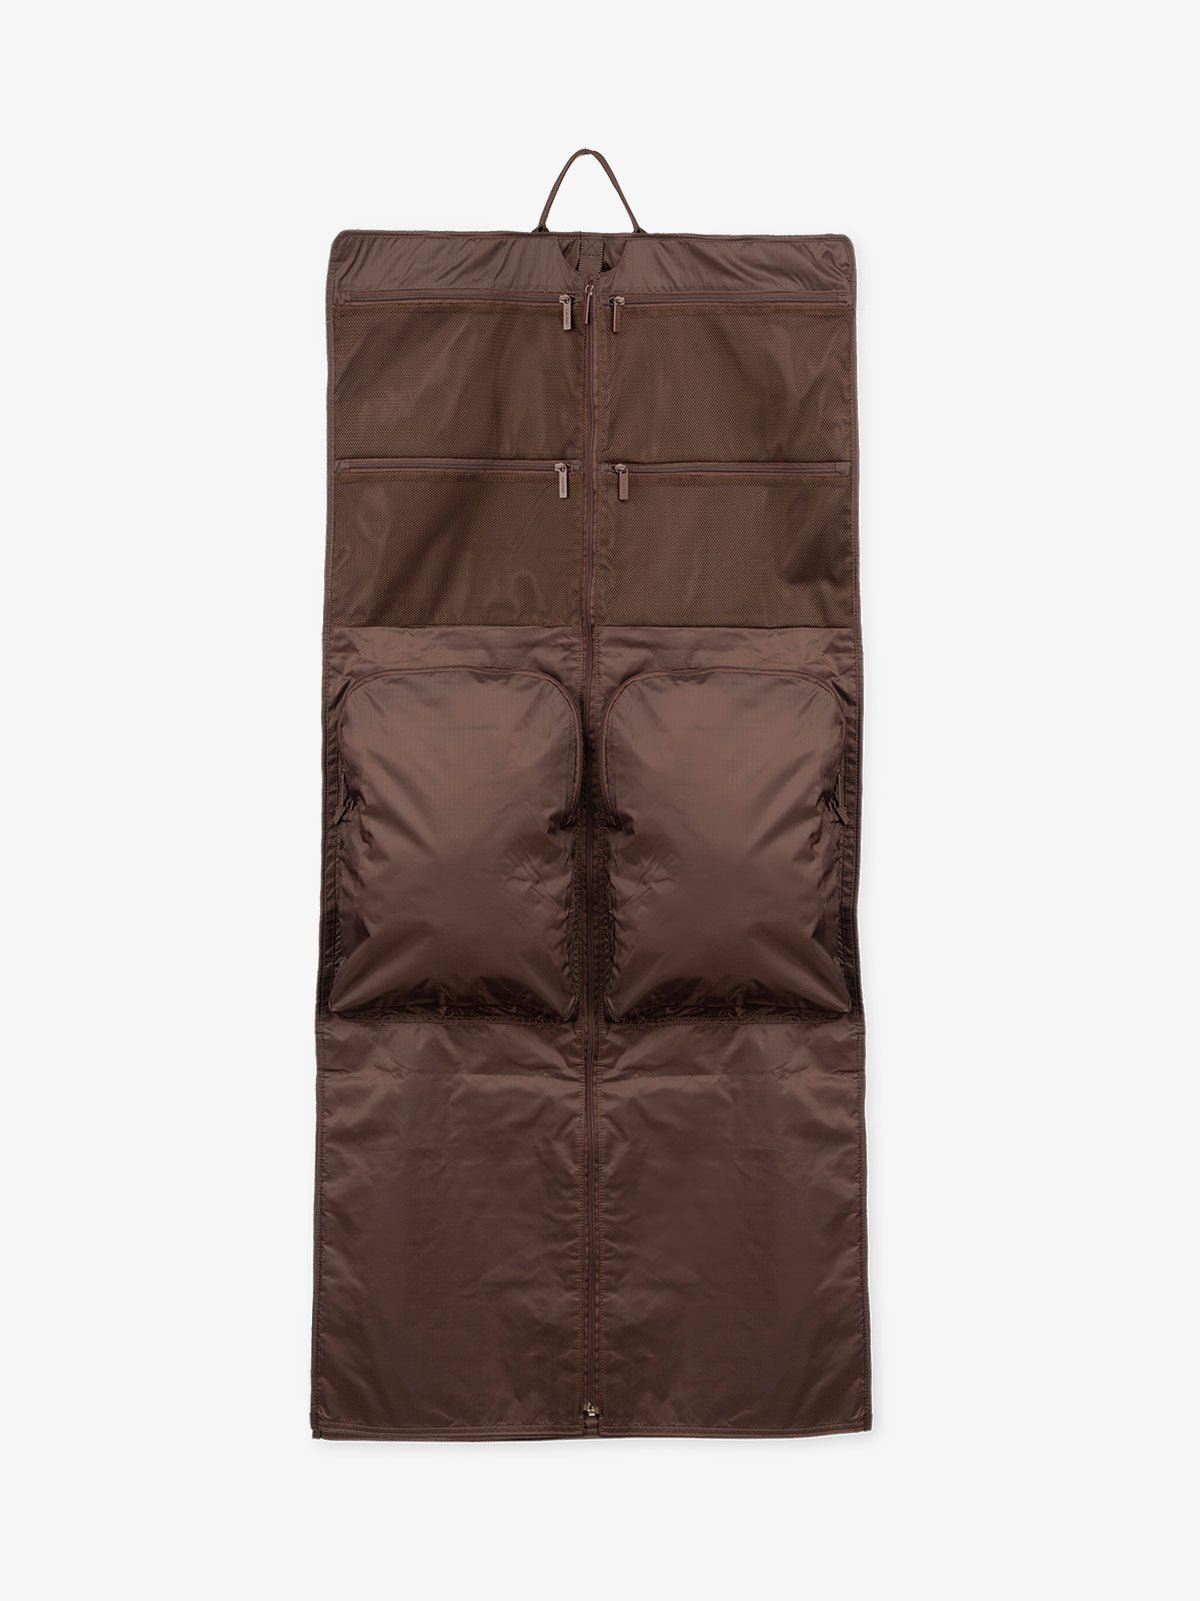 CALPAK Compakt large garment bag for travel with water resistant ripstop nylon fabric and multiple pockets in walnut